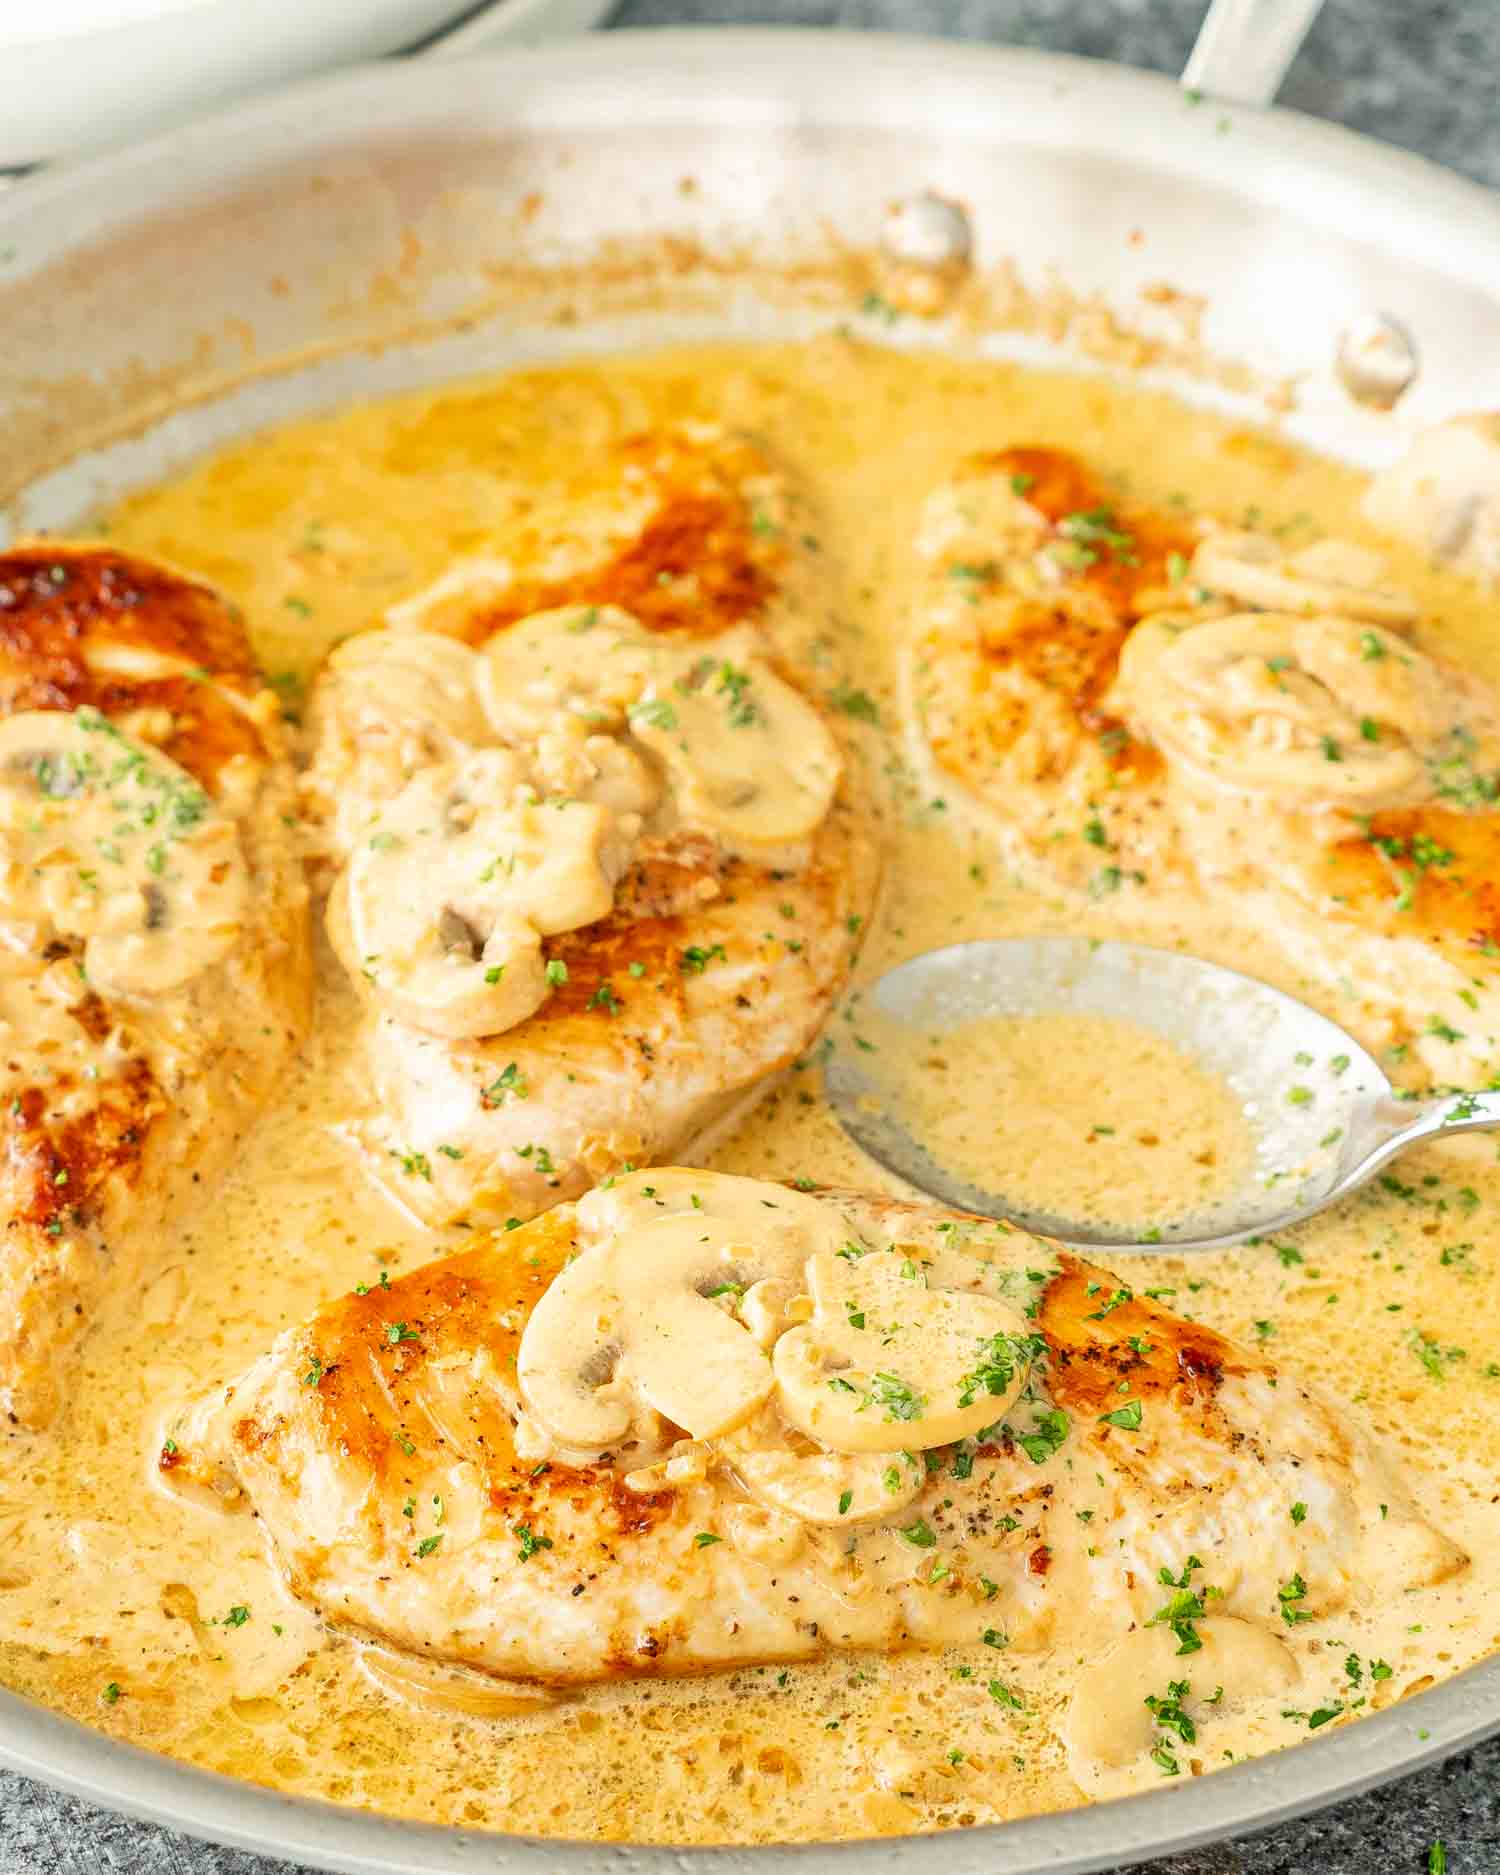 Golden Chicken Diane with mushrooms in a creamy sauce, sprinkled with parsley in a skillet.